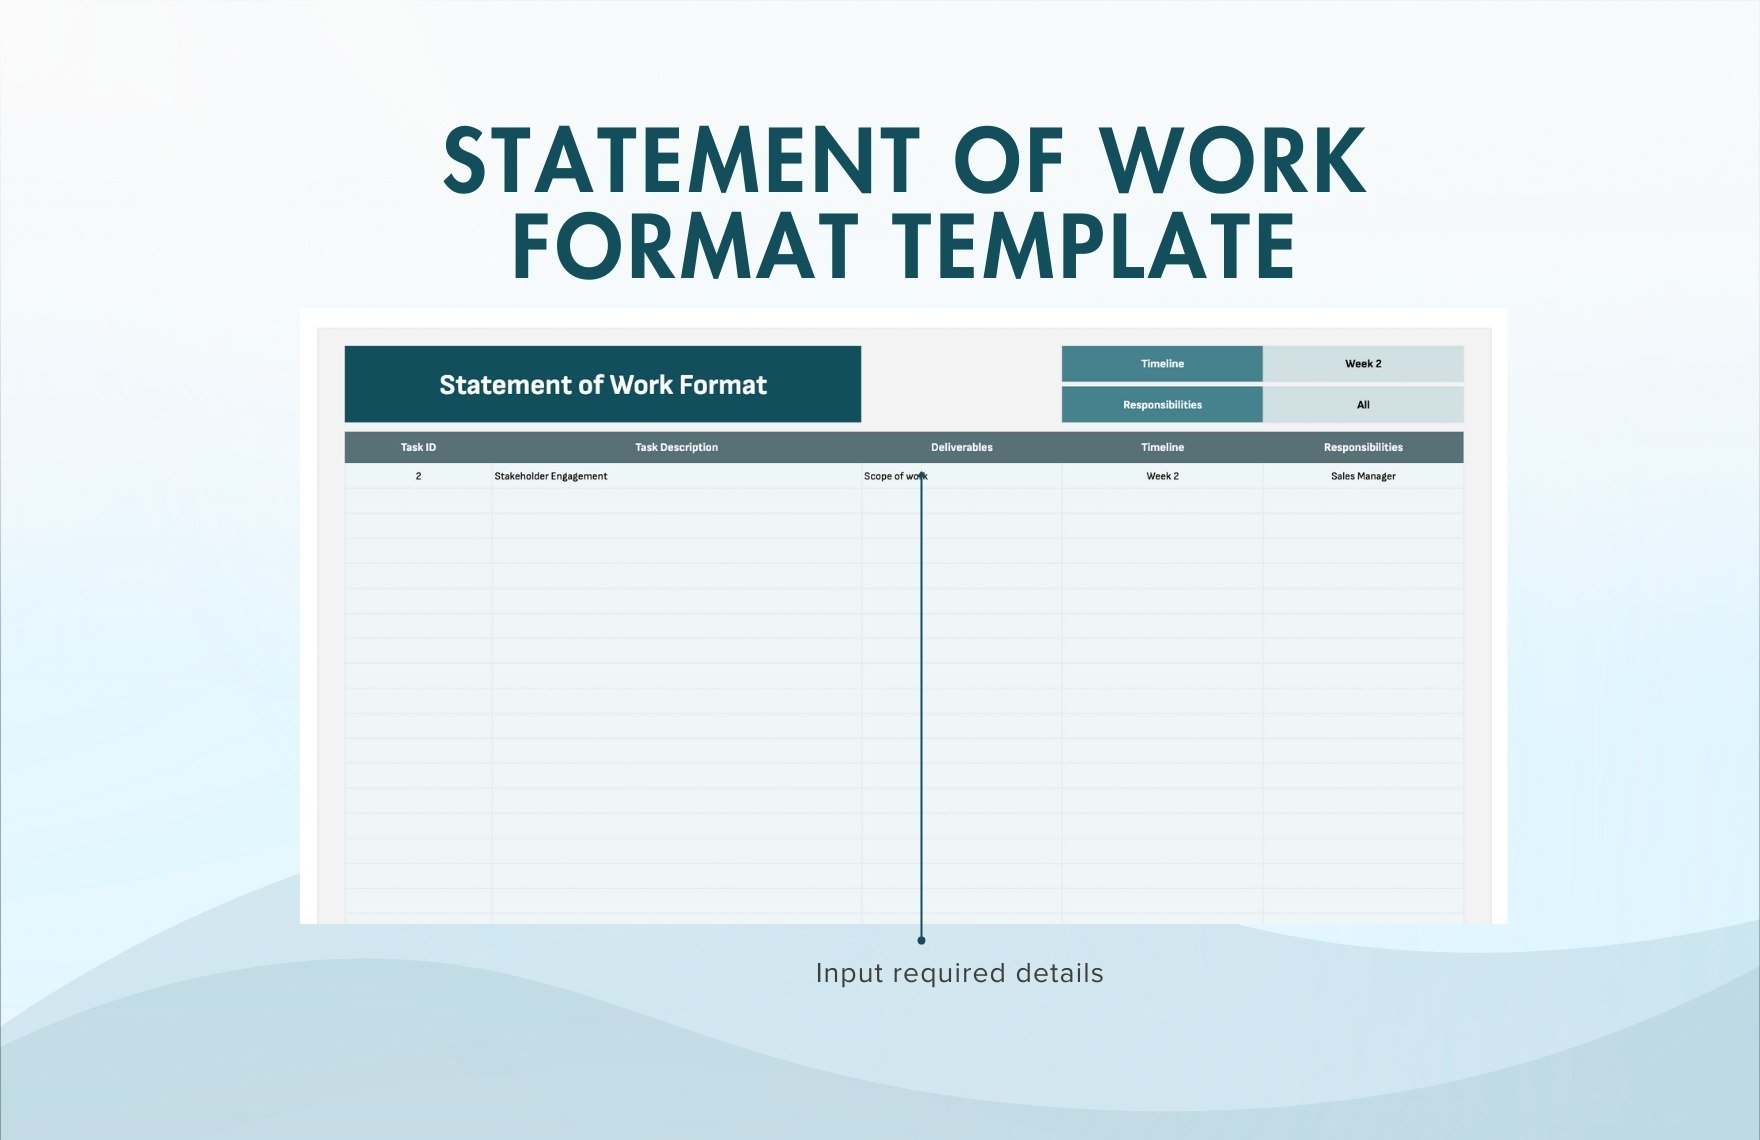 Statement of Work Format Template